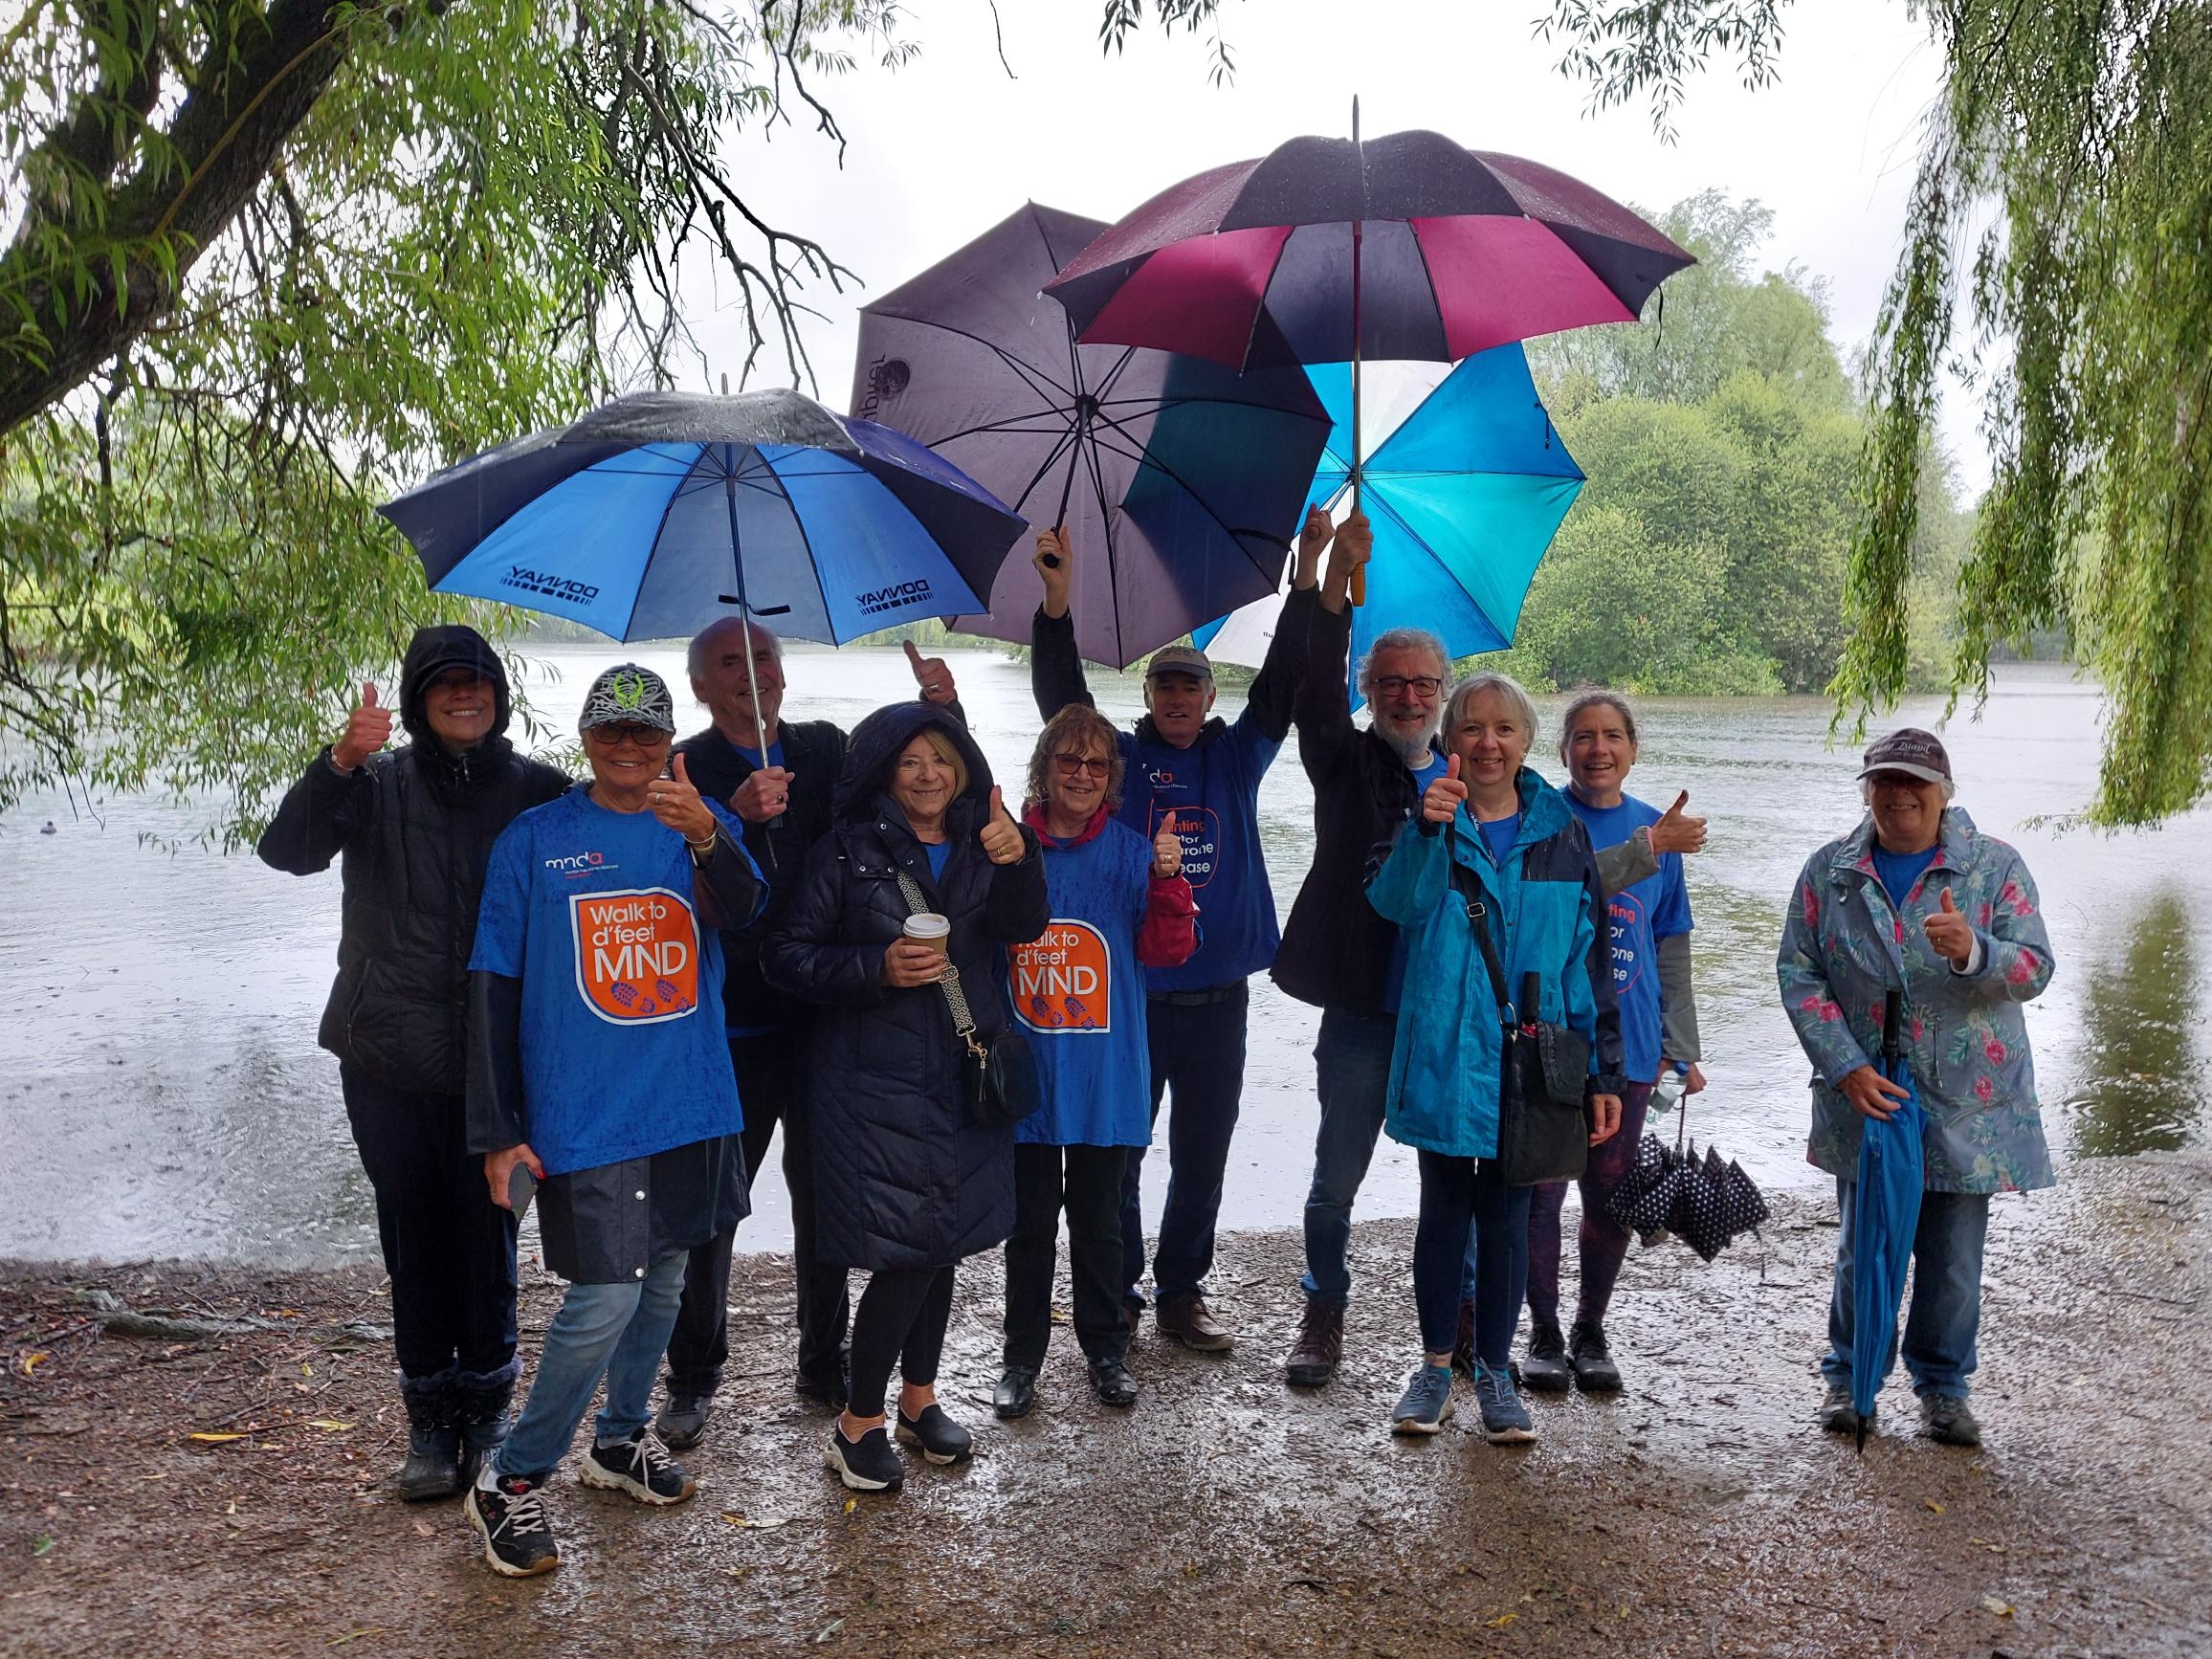 Volunteers and walkers at Stanborough Lakes holding umbrellas for the Hertfordshire branch's annual walk to d'feet. 